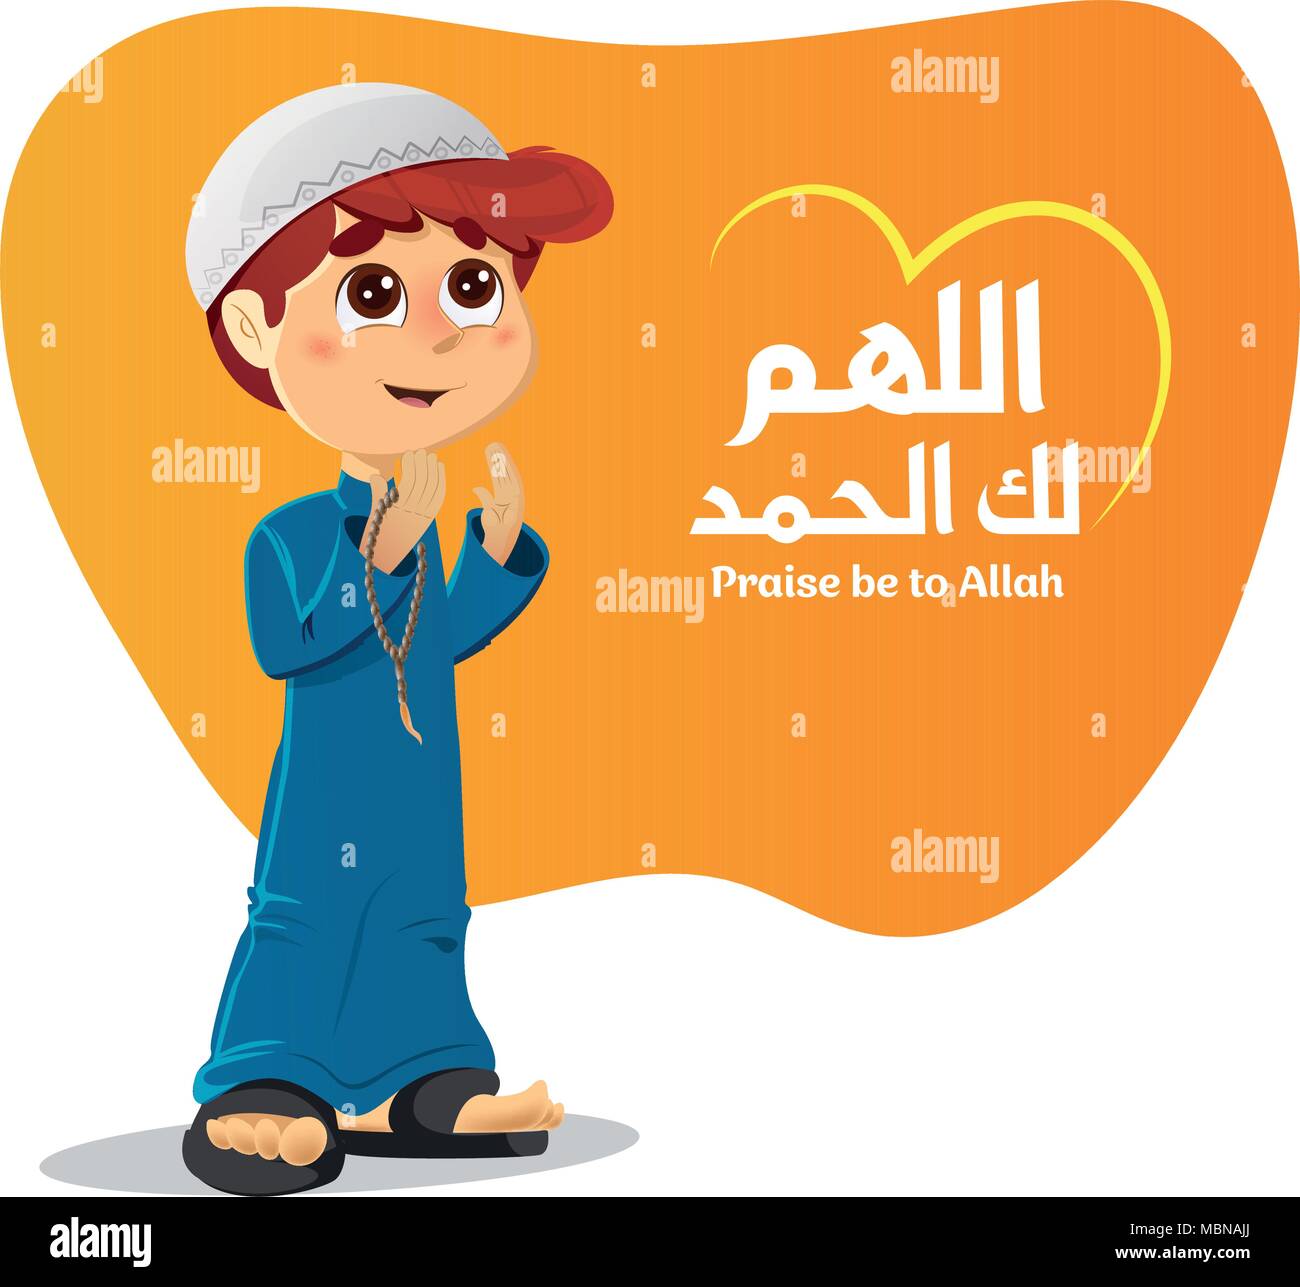 Illustration of A Young Muslim Boy Praying for Allah Stock Vector